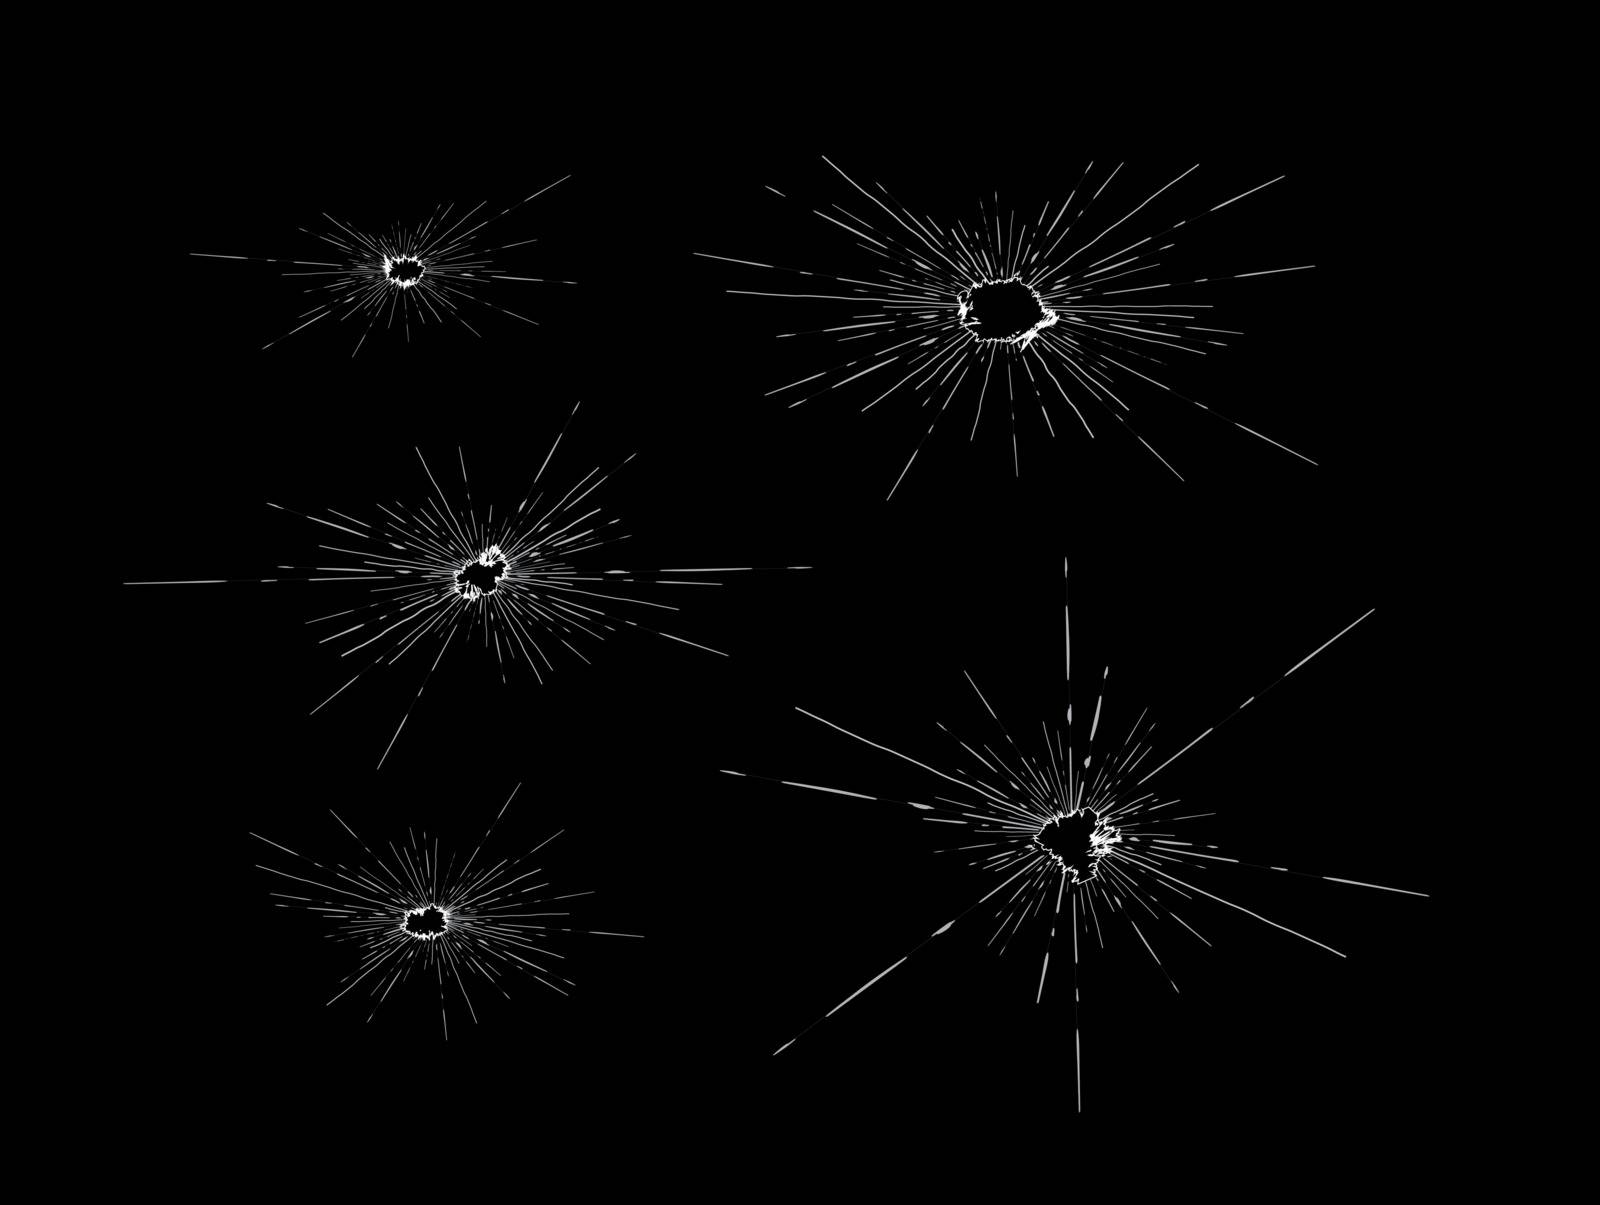 Traces of bullets shattered the glass. Vector illustration on black background